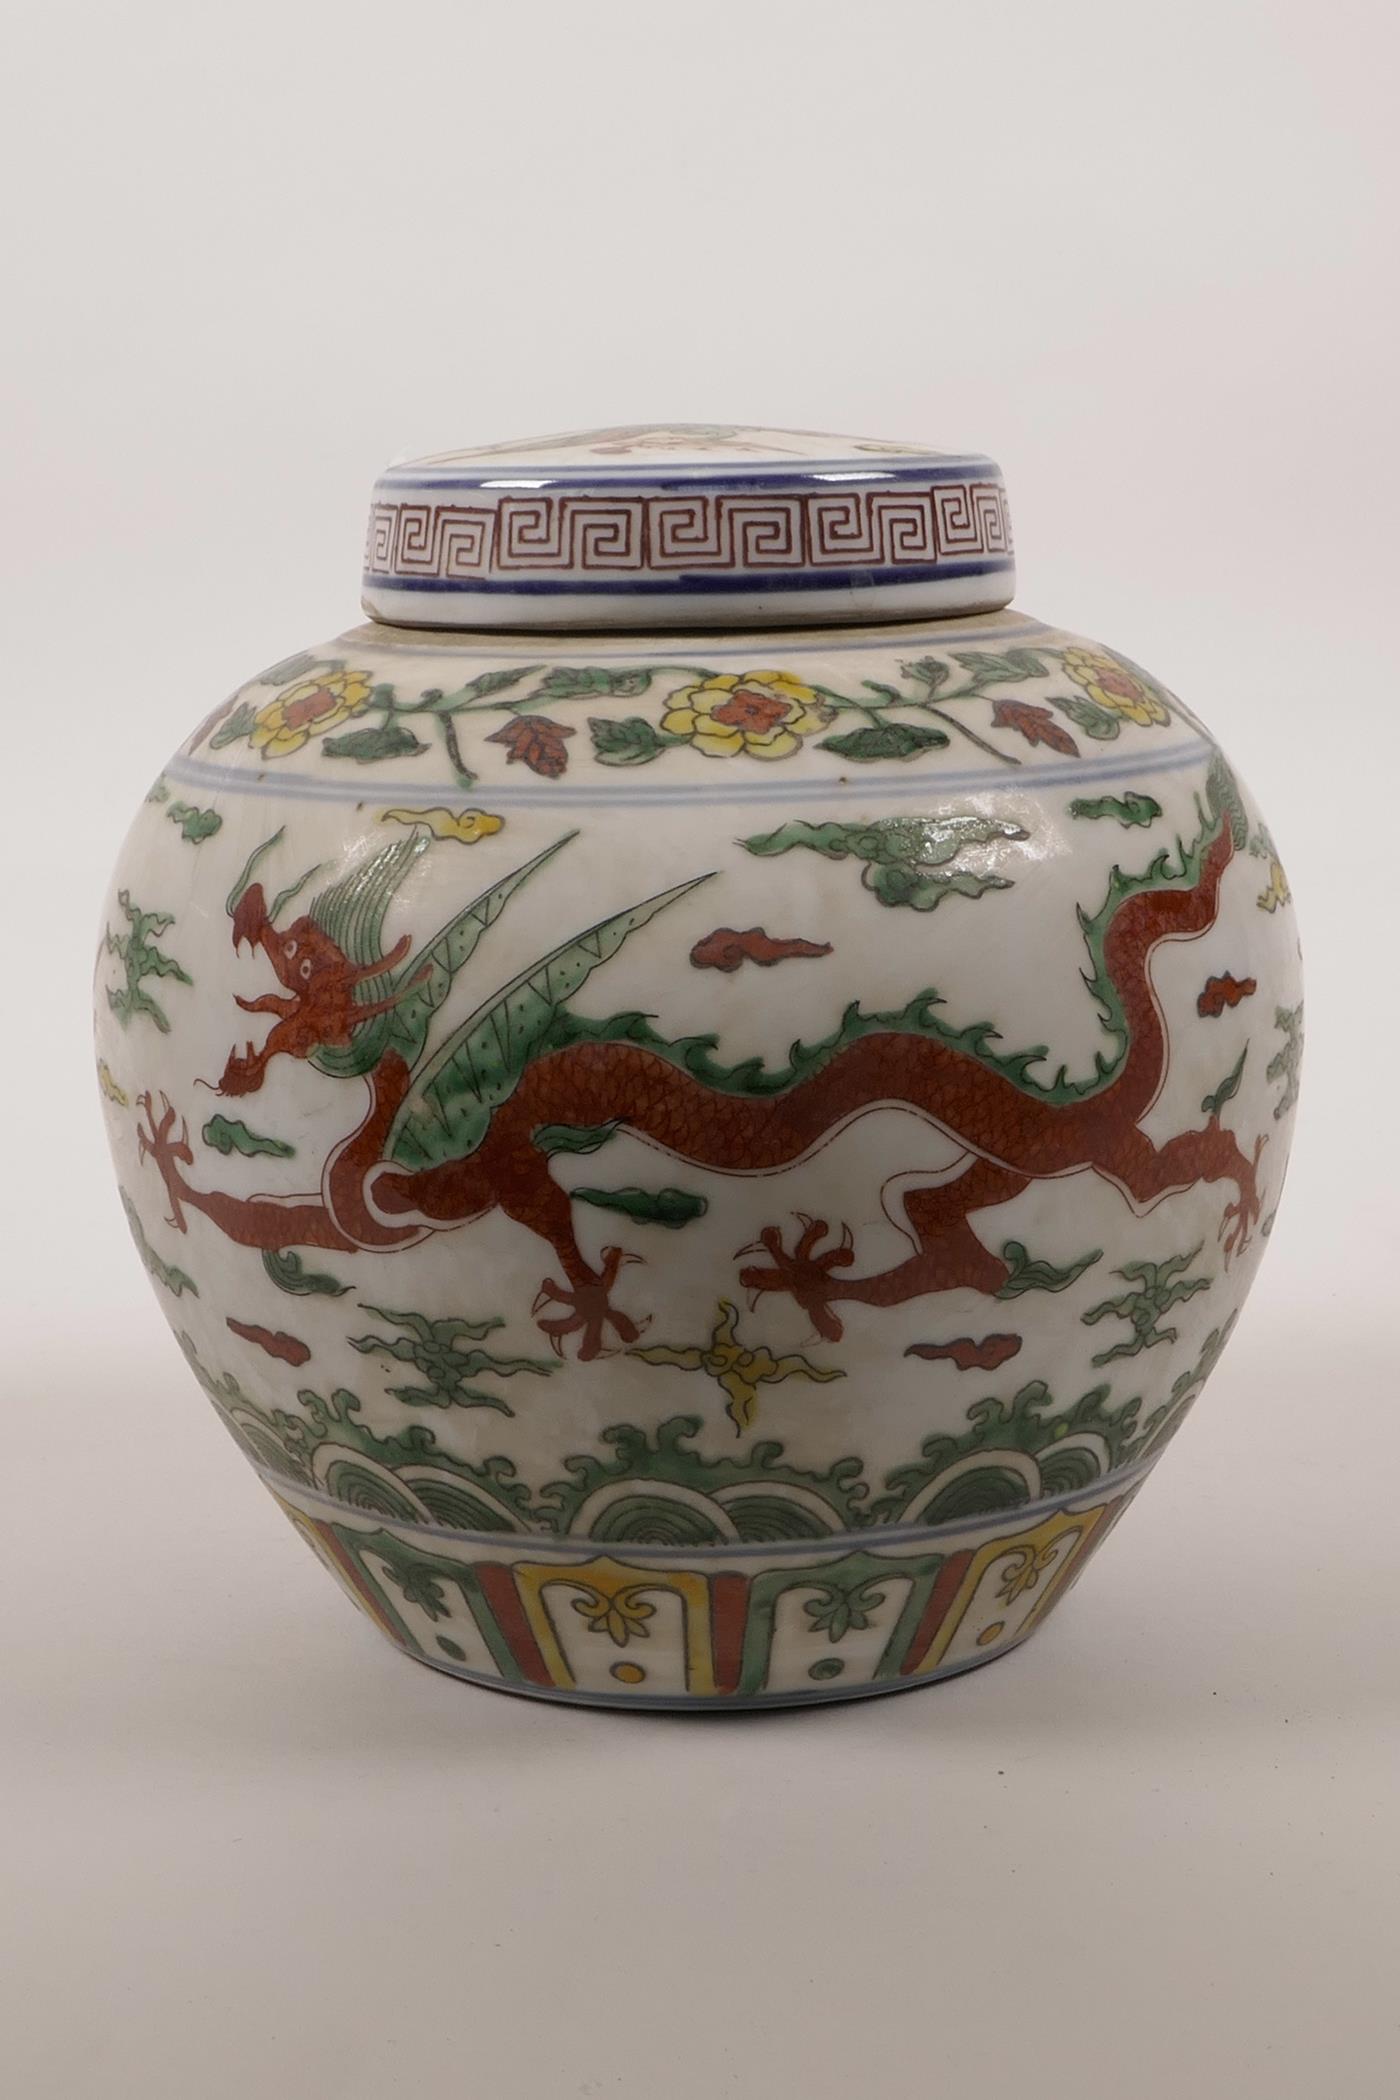 A Chinese wucai porcelain jar and cover decorated with dragons and phoenix in flight, 6 character - Image 2 of 4